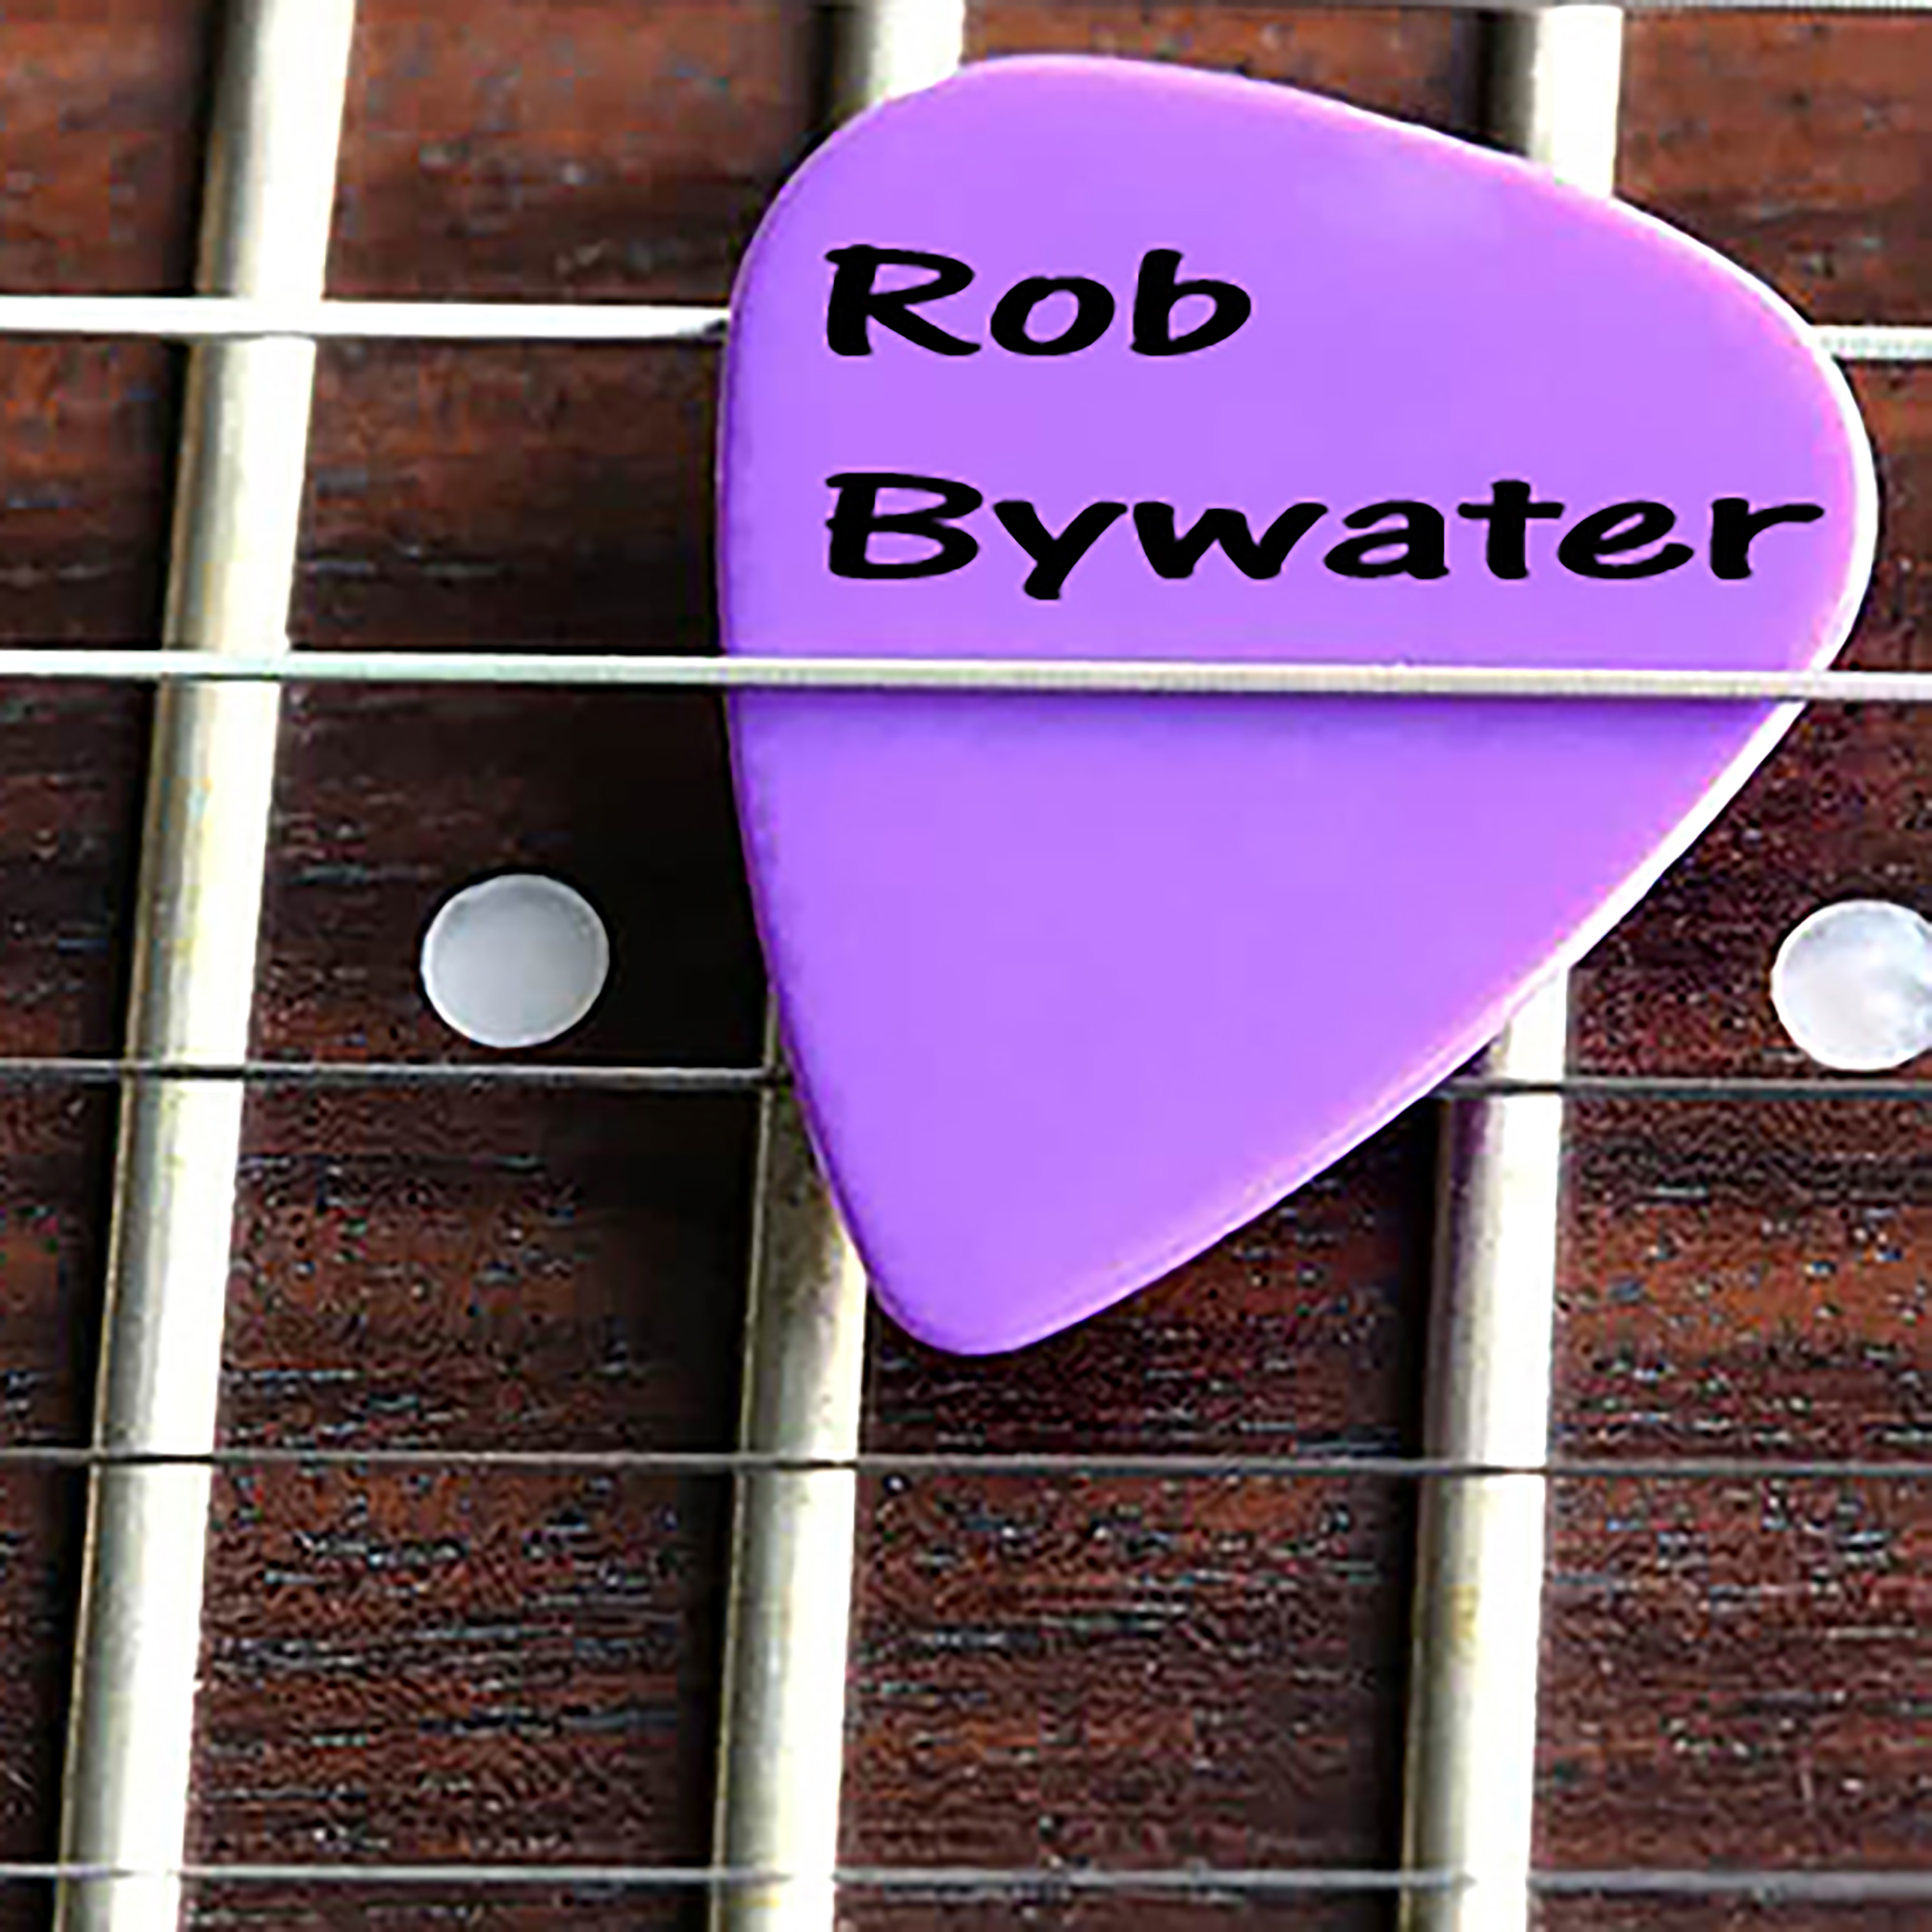 Rob Bywater